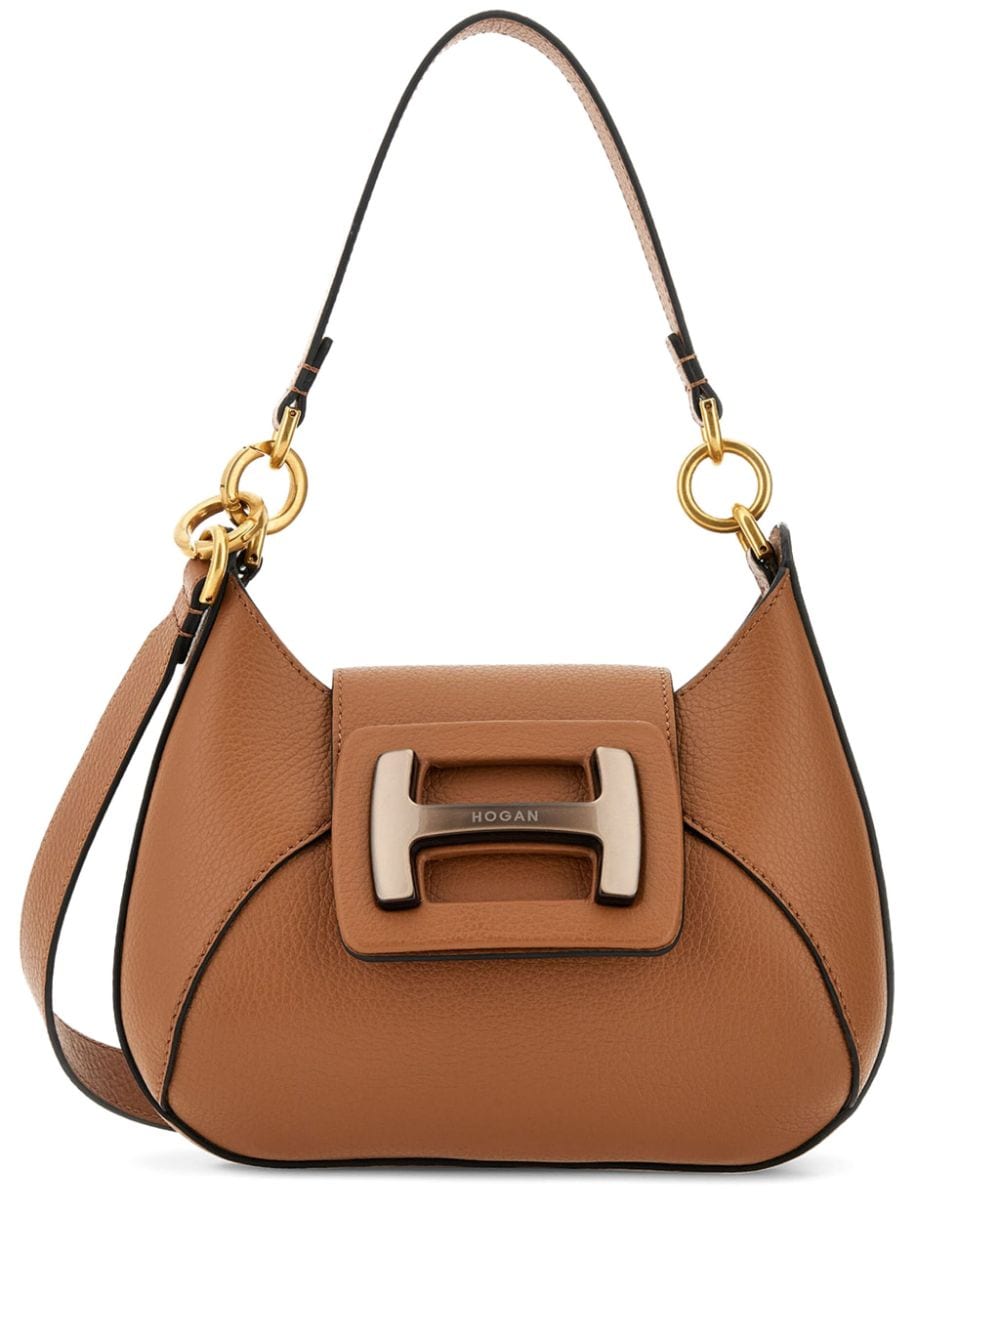 Shop Hogan Butterscotch Brown Leather Mini Hobo Shoulder Bag For Women In Leather Brown